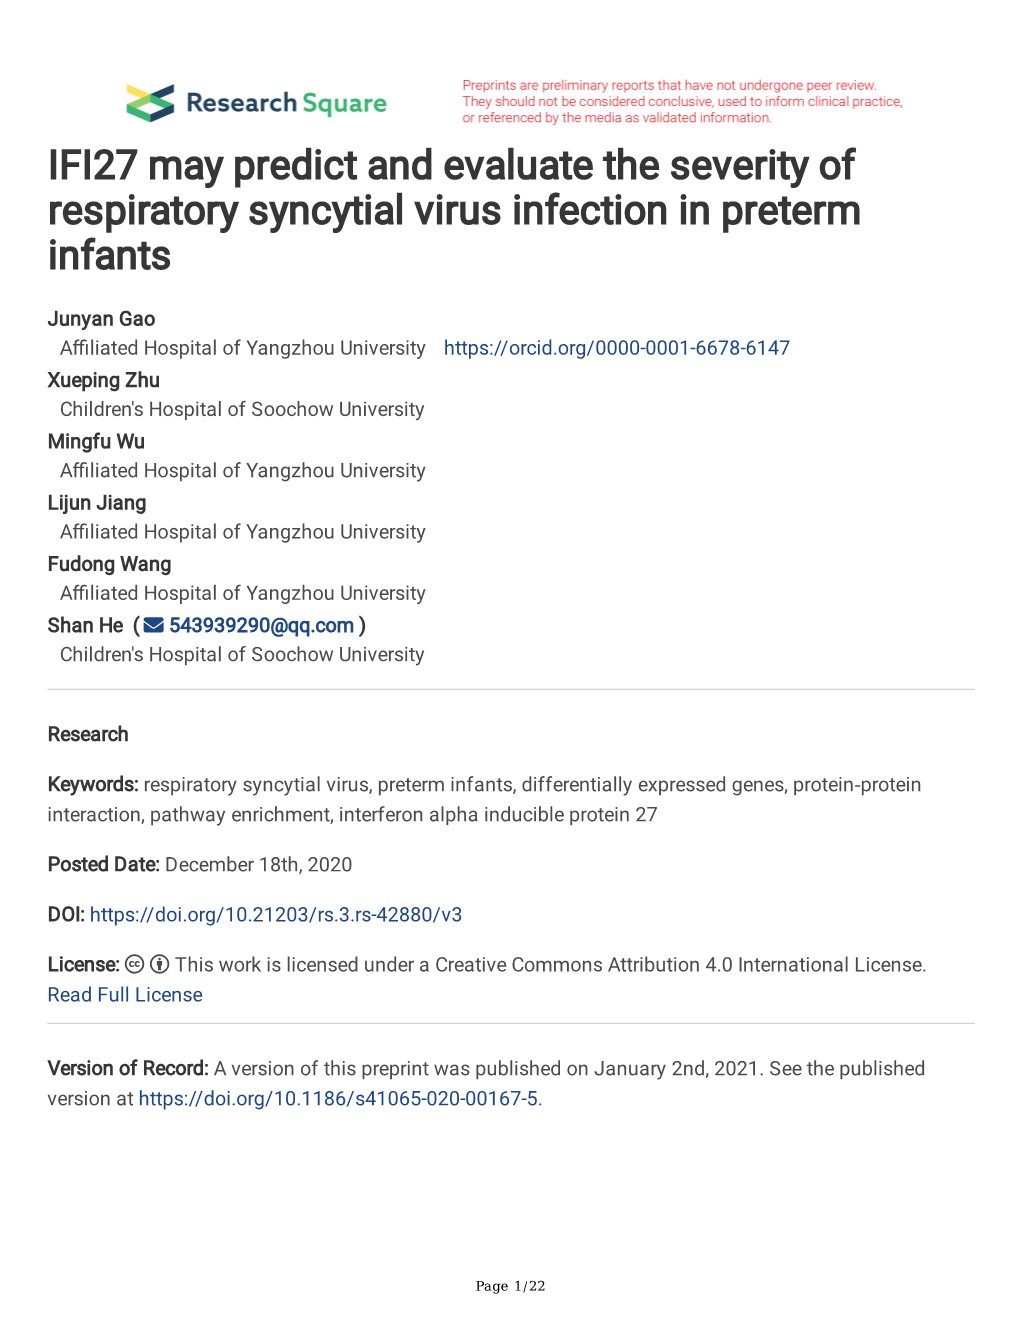 IFI27 May Predict and Evaluate the Severity of Respiratory Syncytial Virus Infection in Preterm Infants